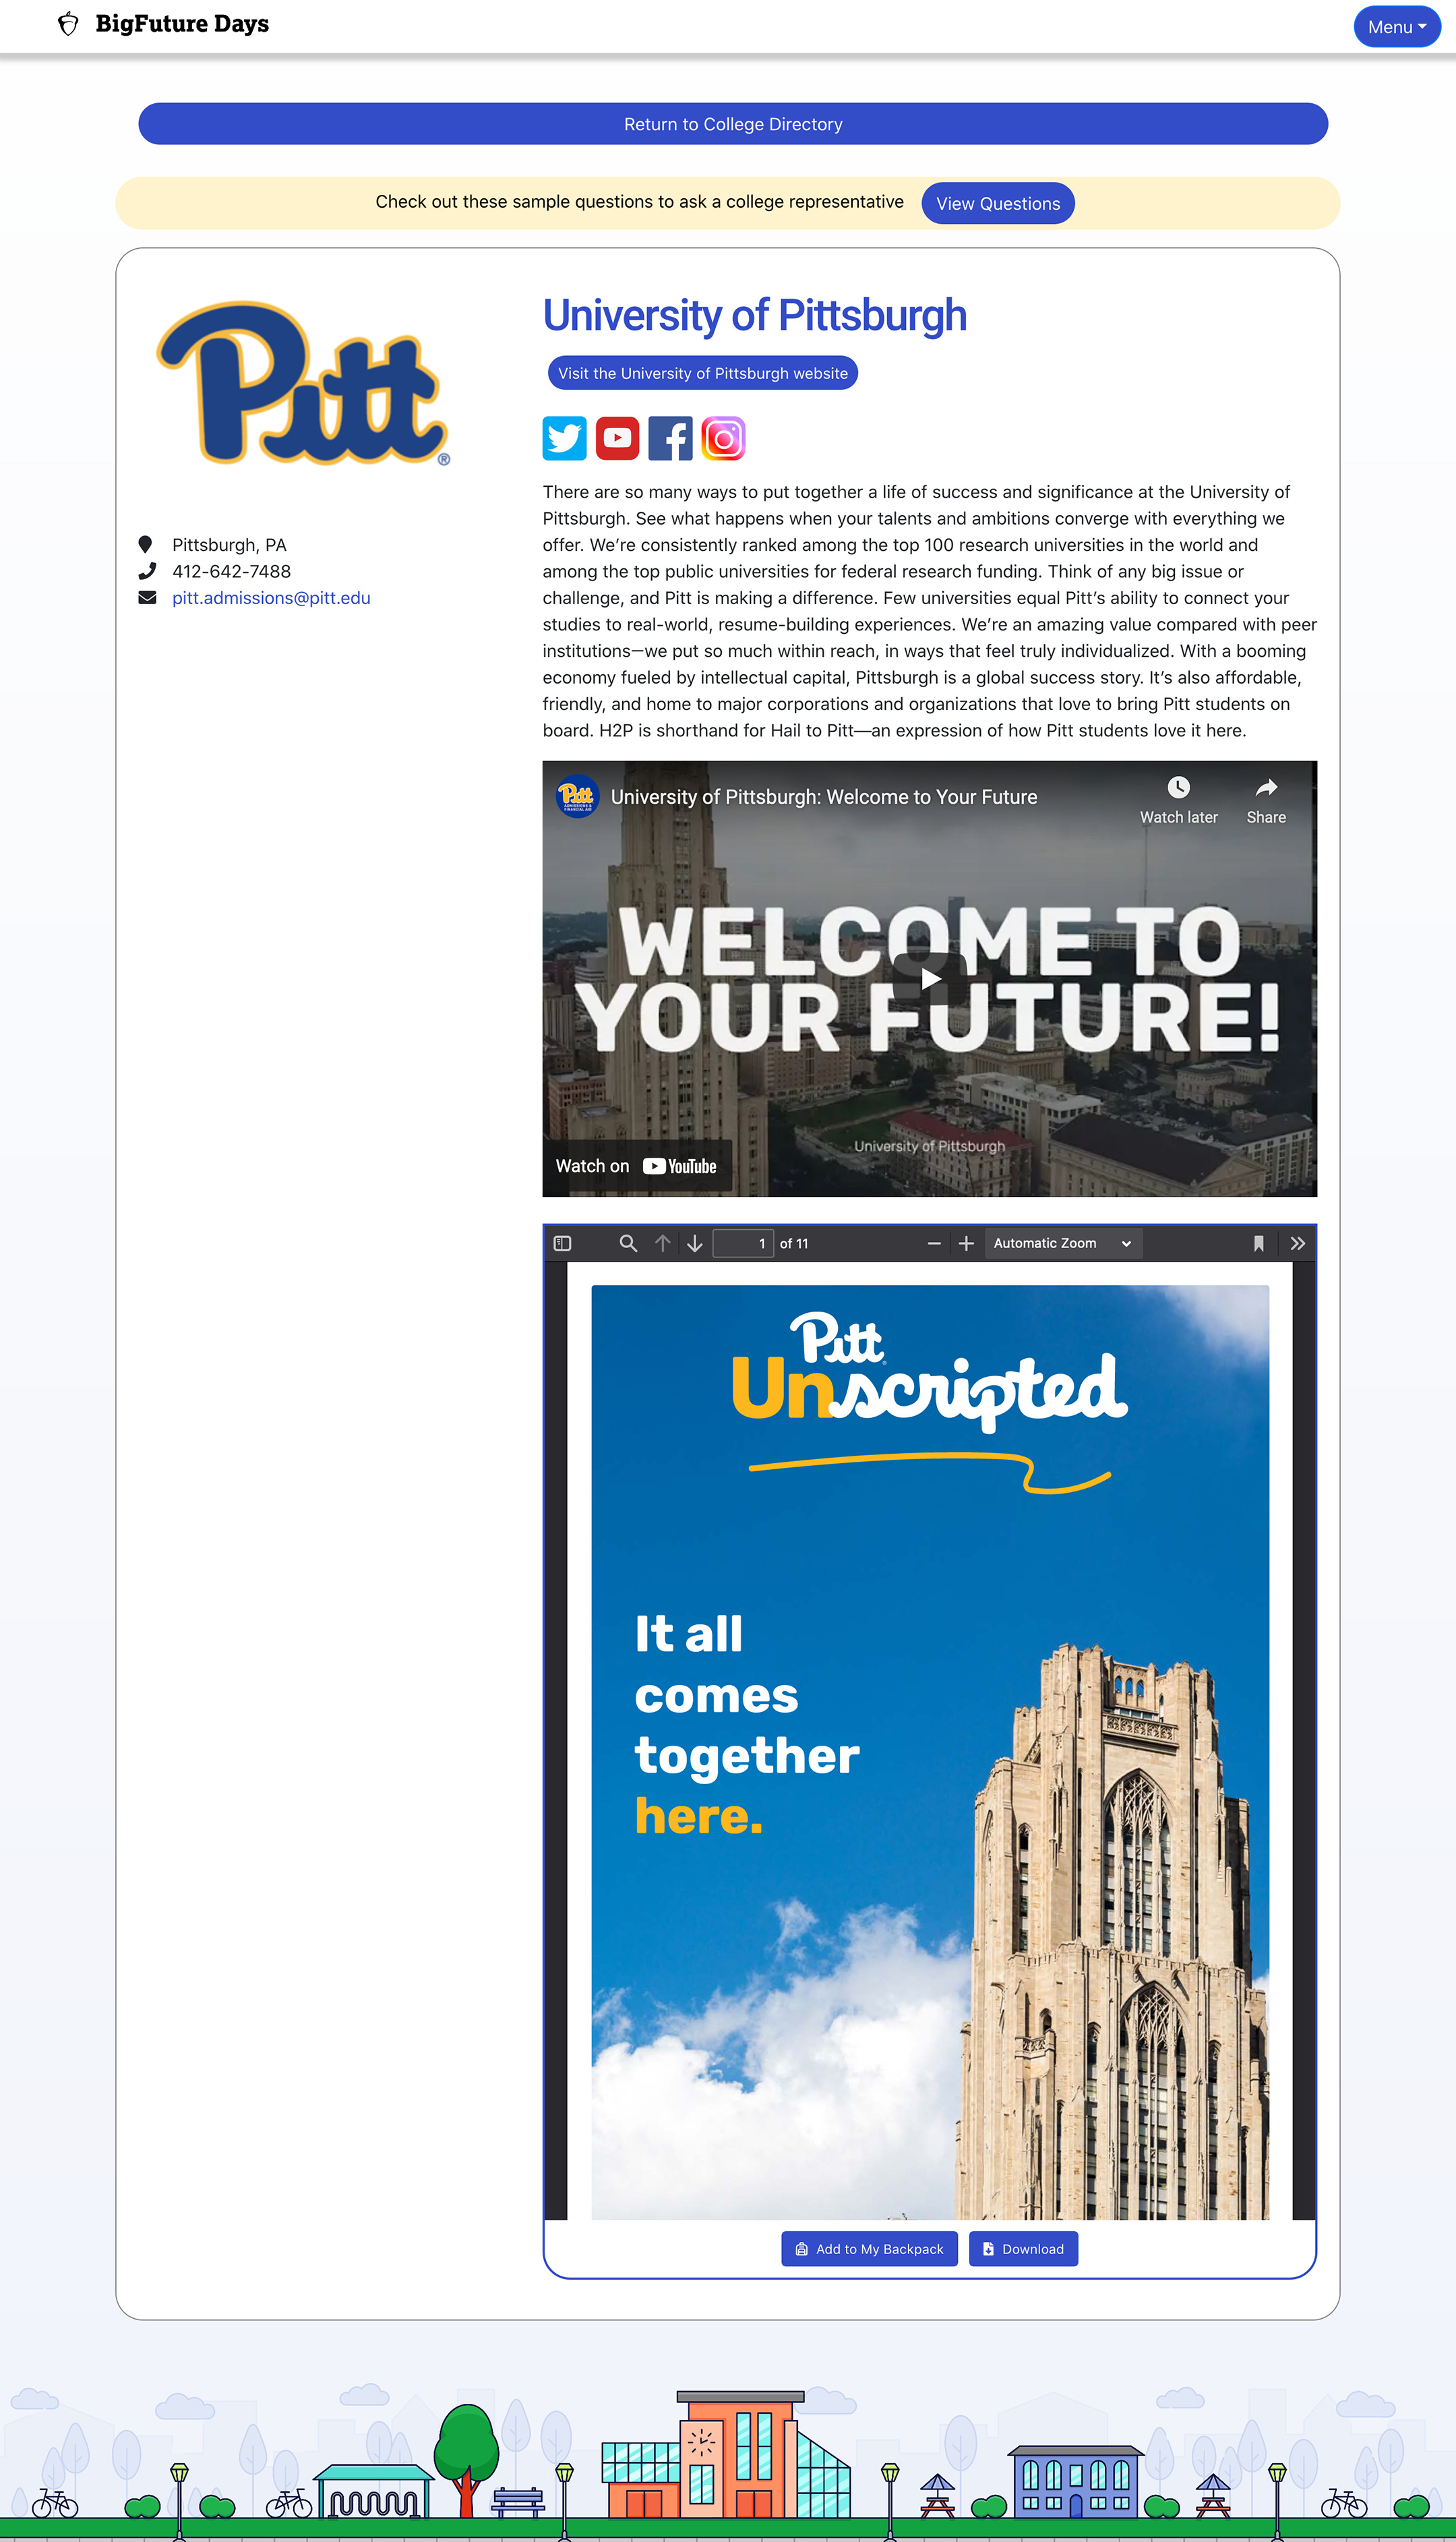 Screenshot showing the University of Pittsburgh logo above a YouTube clip from the school, which itself is above a PDF brochure for the school